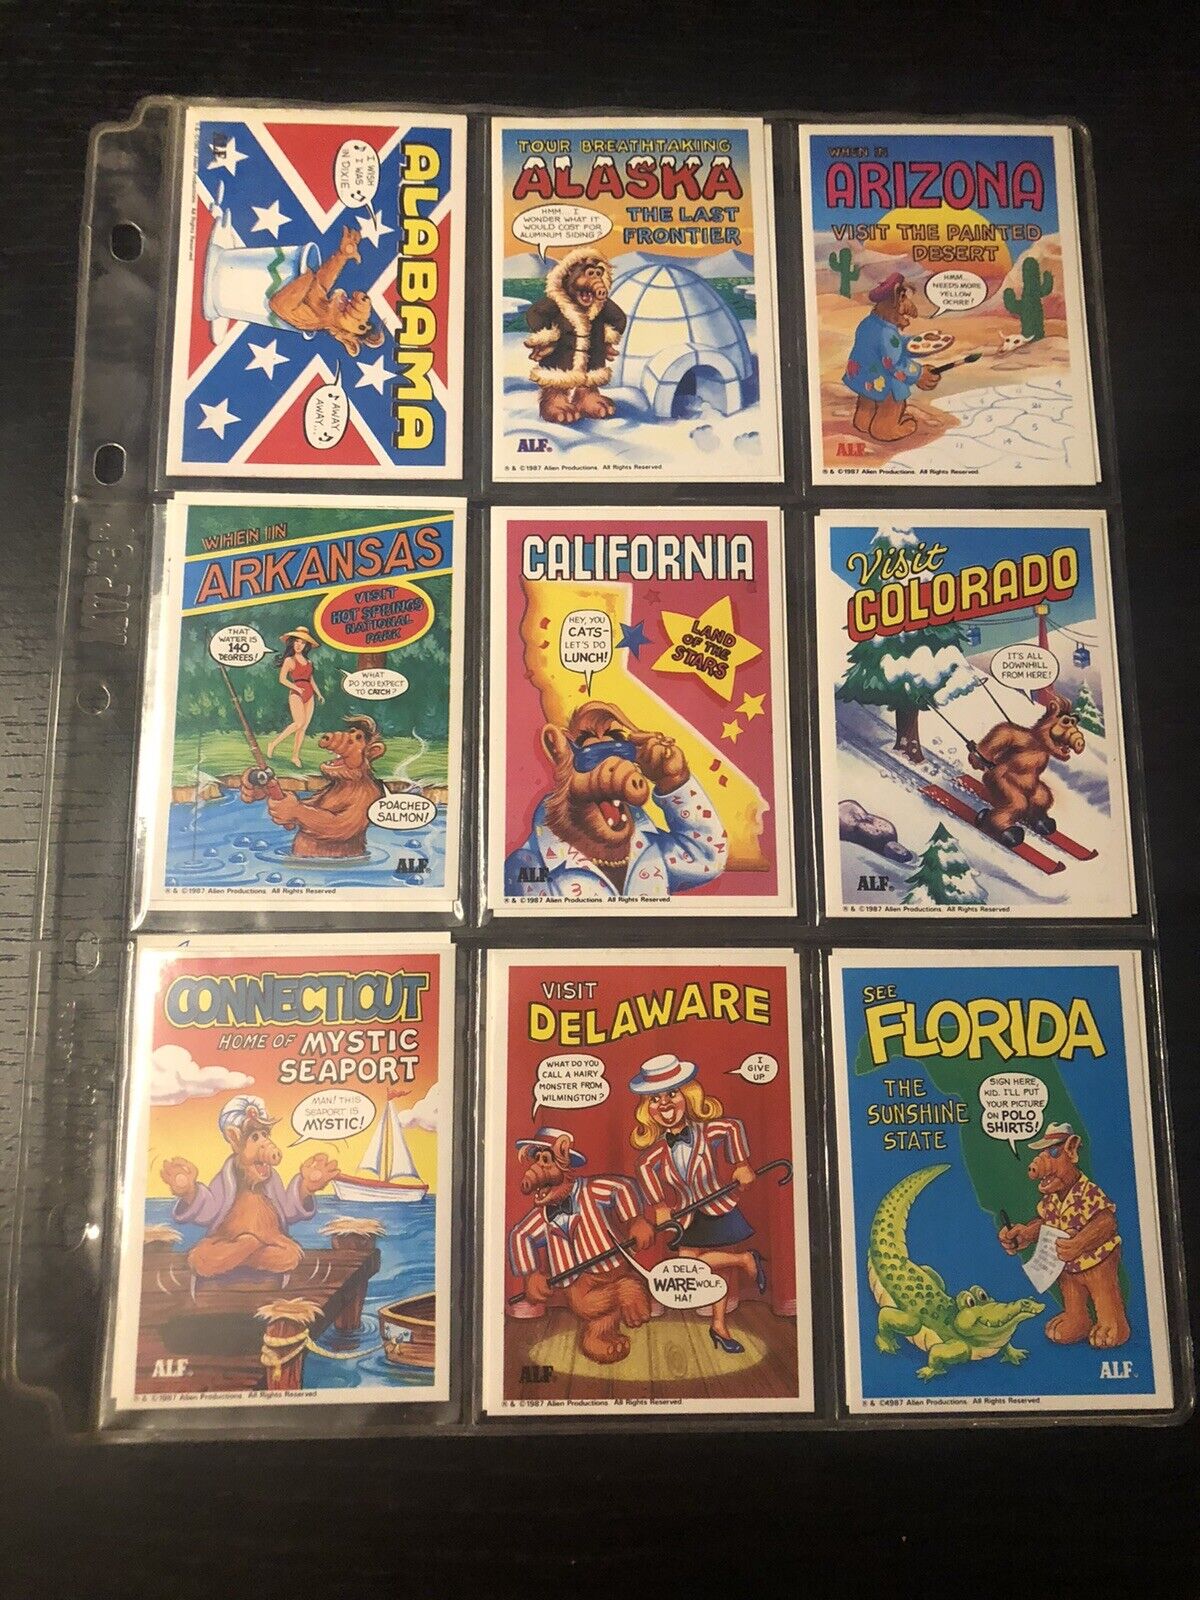 1987 TOPPS ALF Trading Cards Full Set - All 50 States and US Of Alf Card S